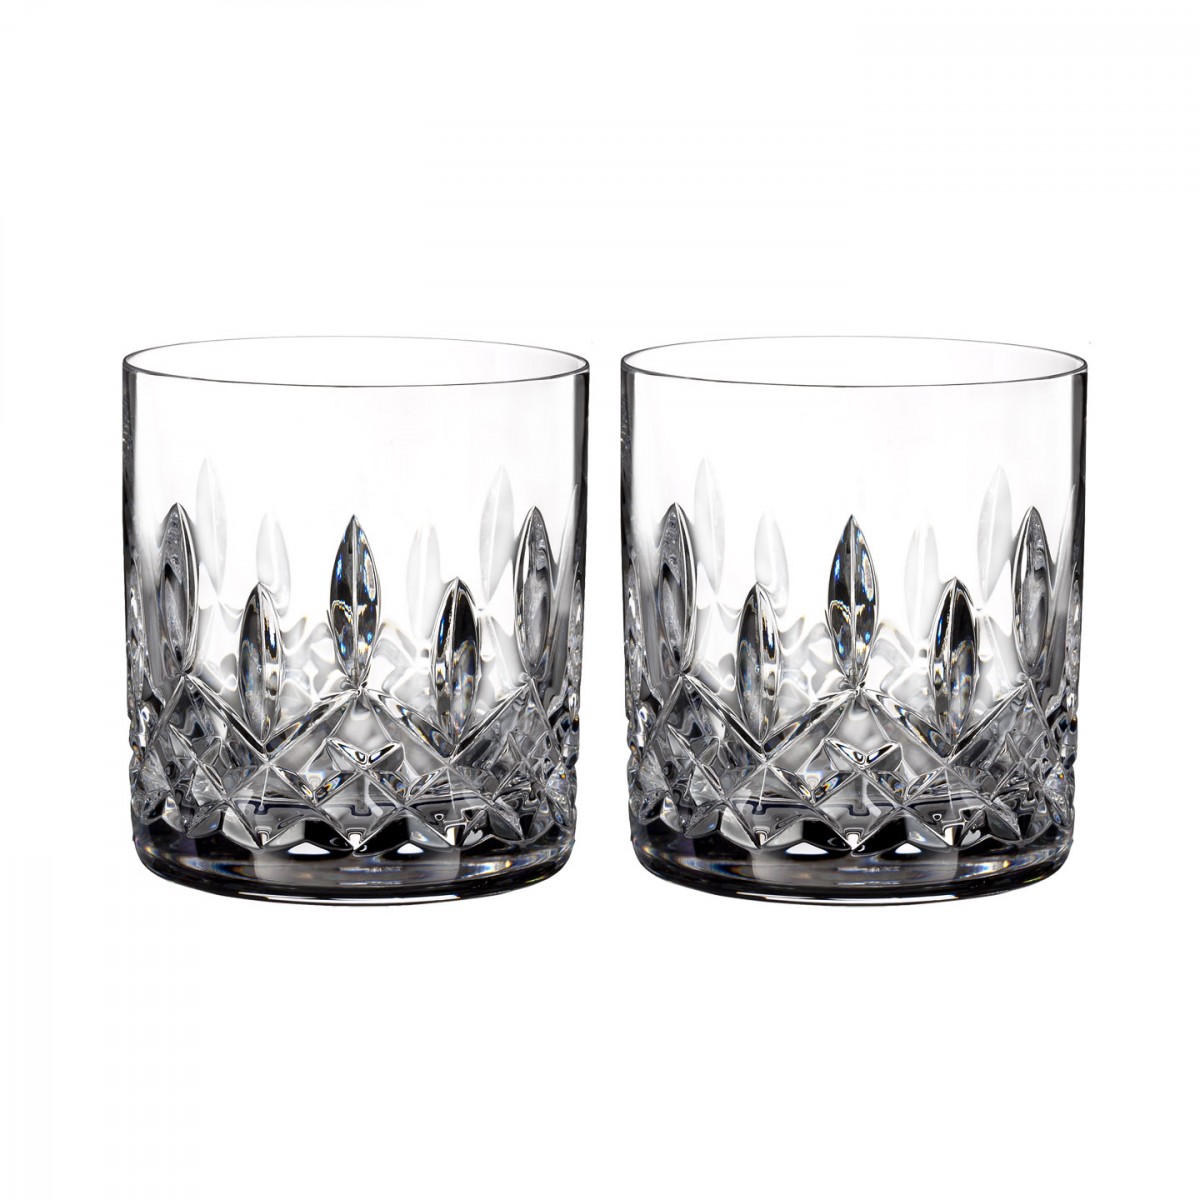 Waterford Crystal, Lismore 5 oz Straight Sided Whiskey Tumblers, Pair